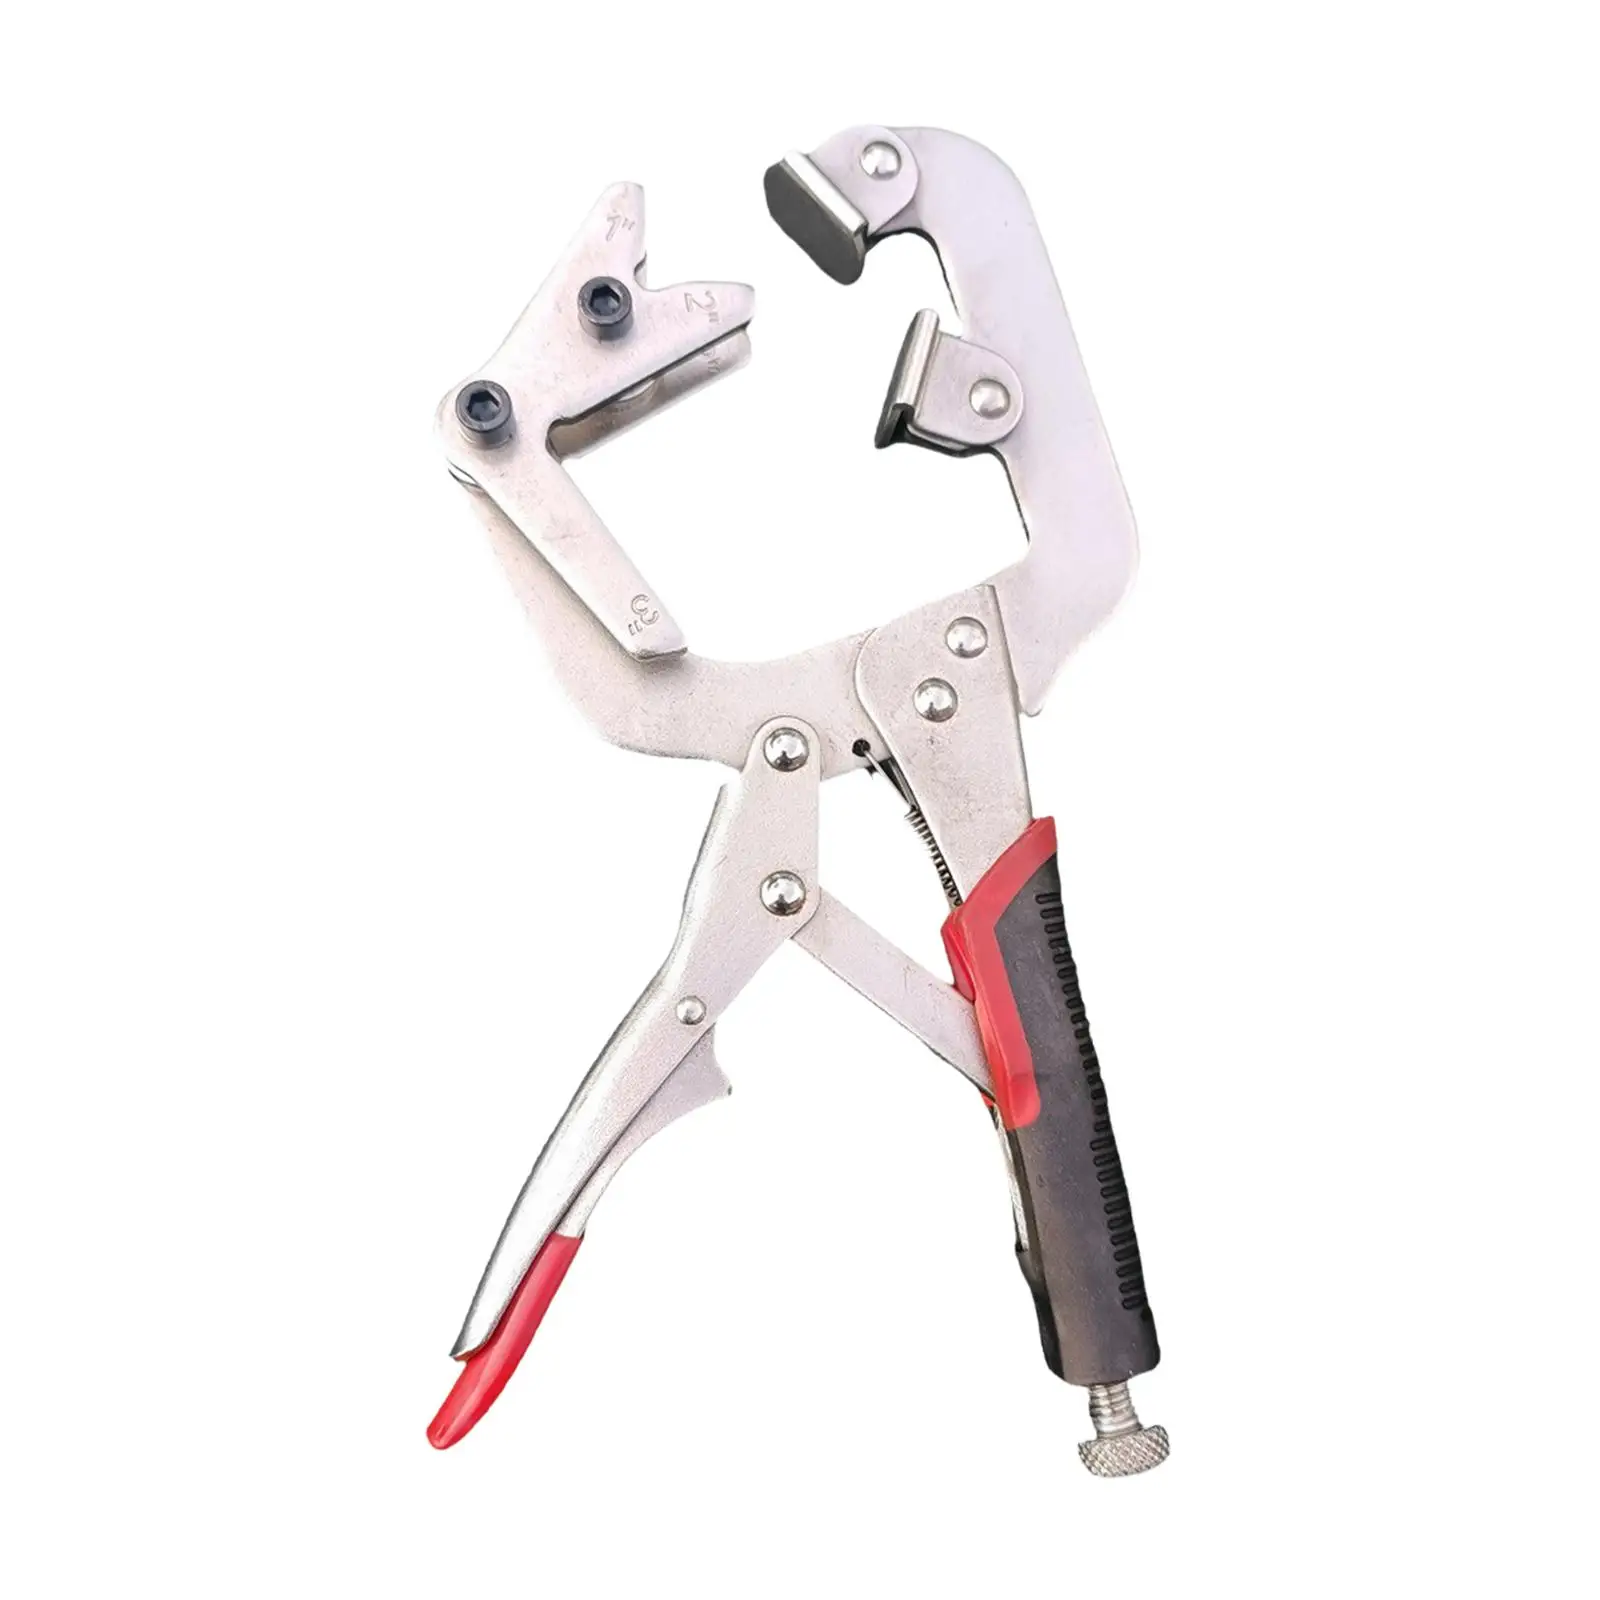 Locking Clamps 10 inch Adjustable Heavy Duty Welding Pipe Plier Clamp Set Clamp Locking Pliers for Auto Woodwork Home Farm